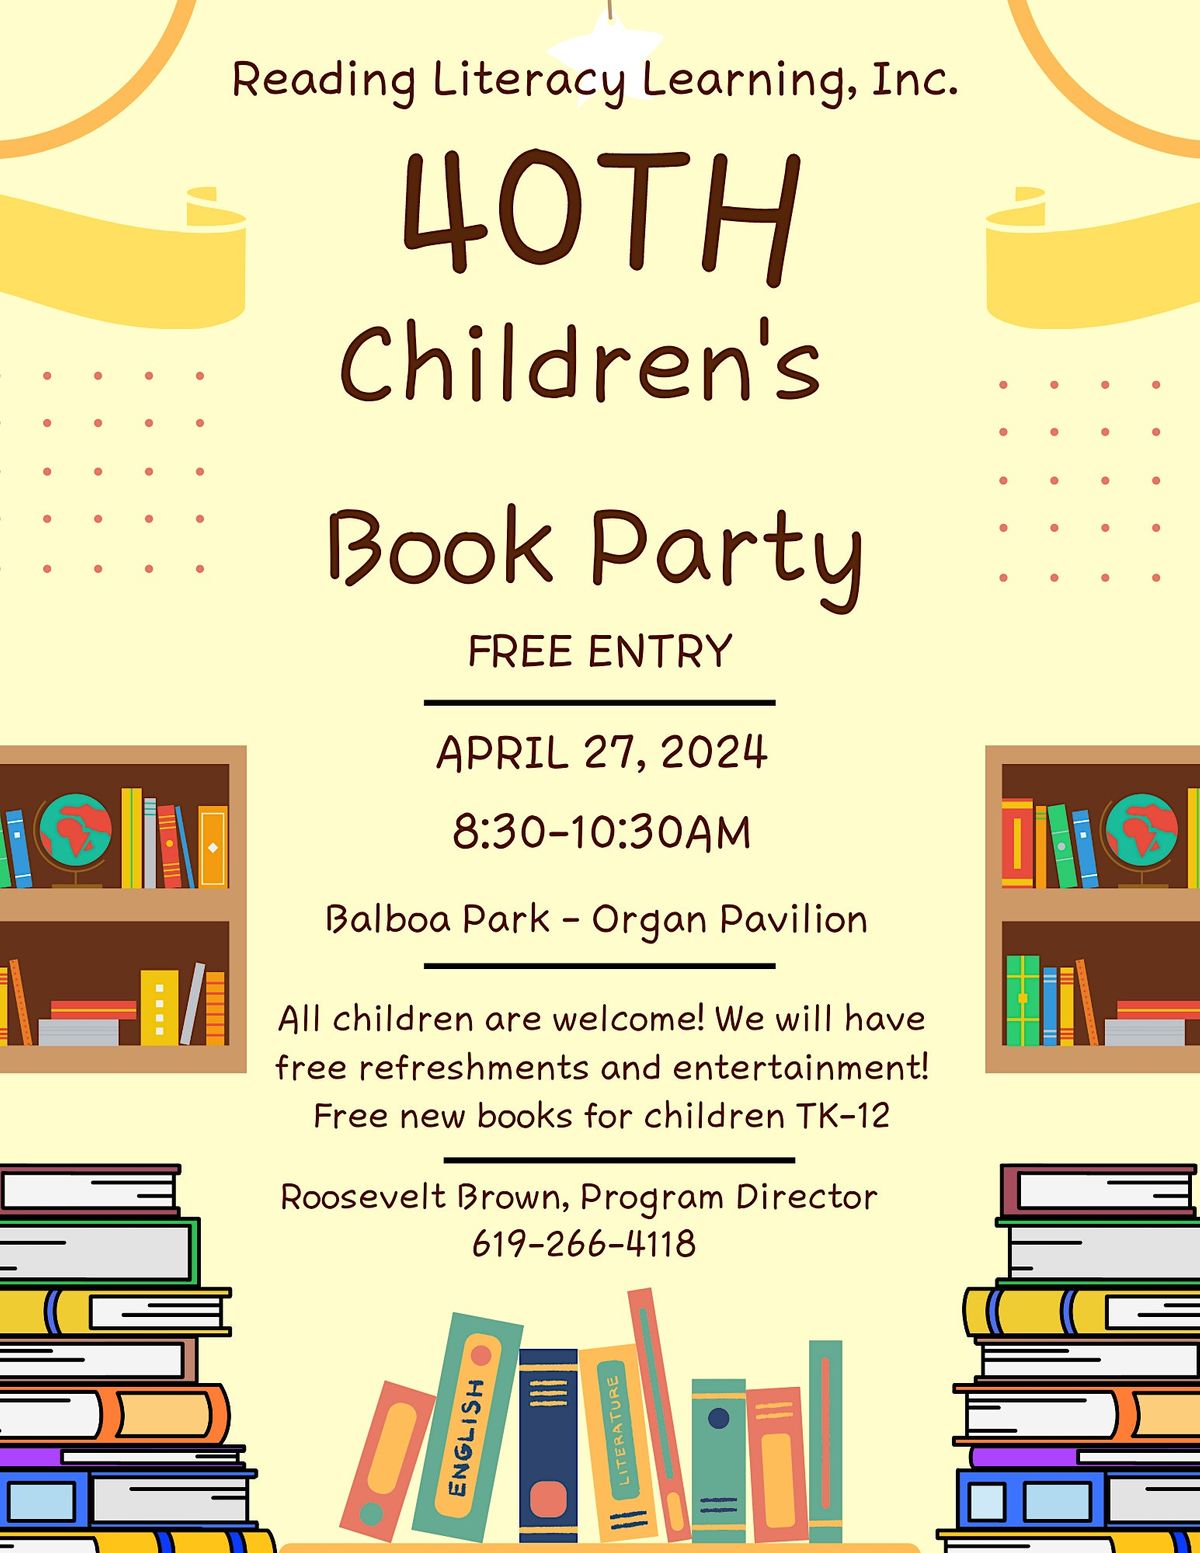 VOLUNTEERING EVENT - 40th Children's Book Party, April 27 at Balboa Park